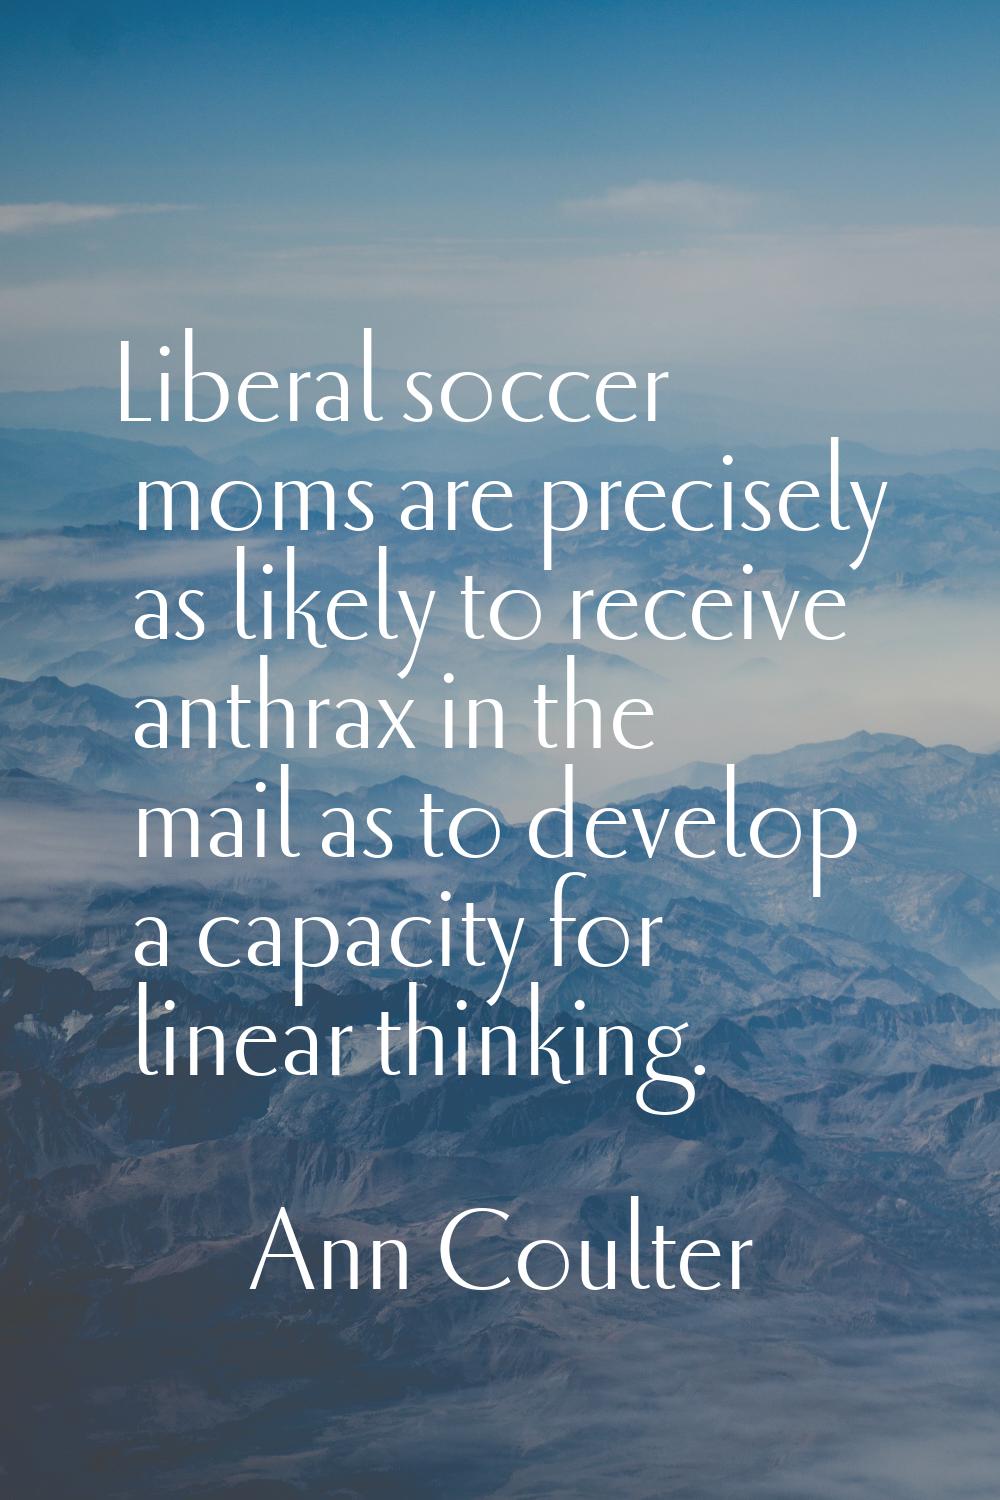 Liberal soccer moms are precisely as likely to receive anthrax in the mail as to develop a capacity